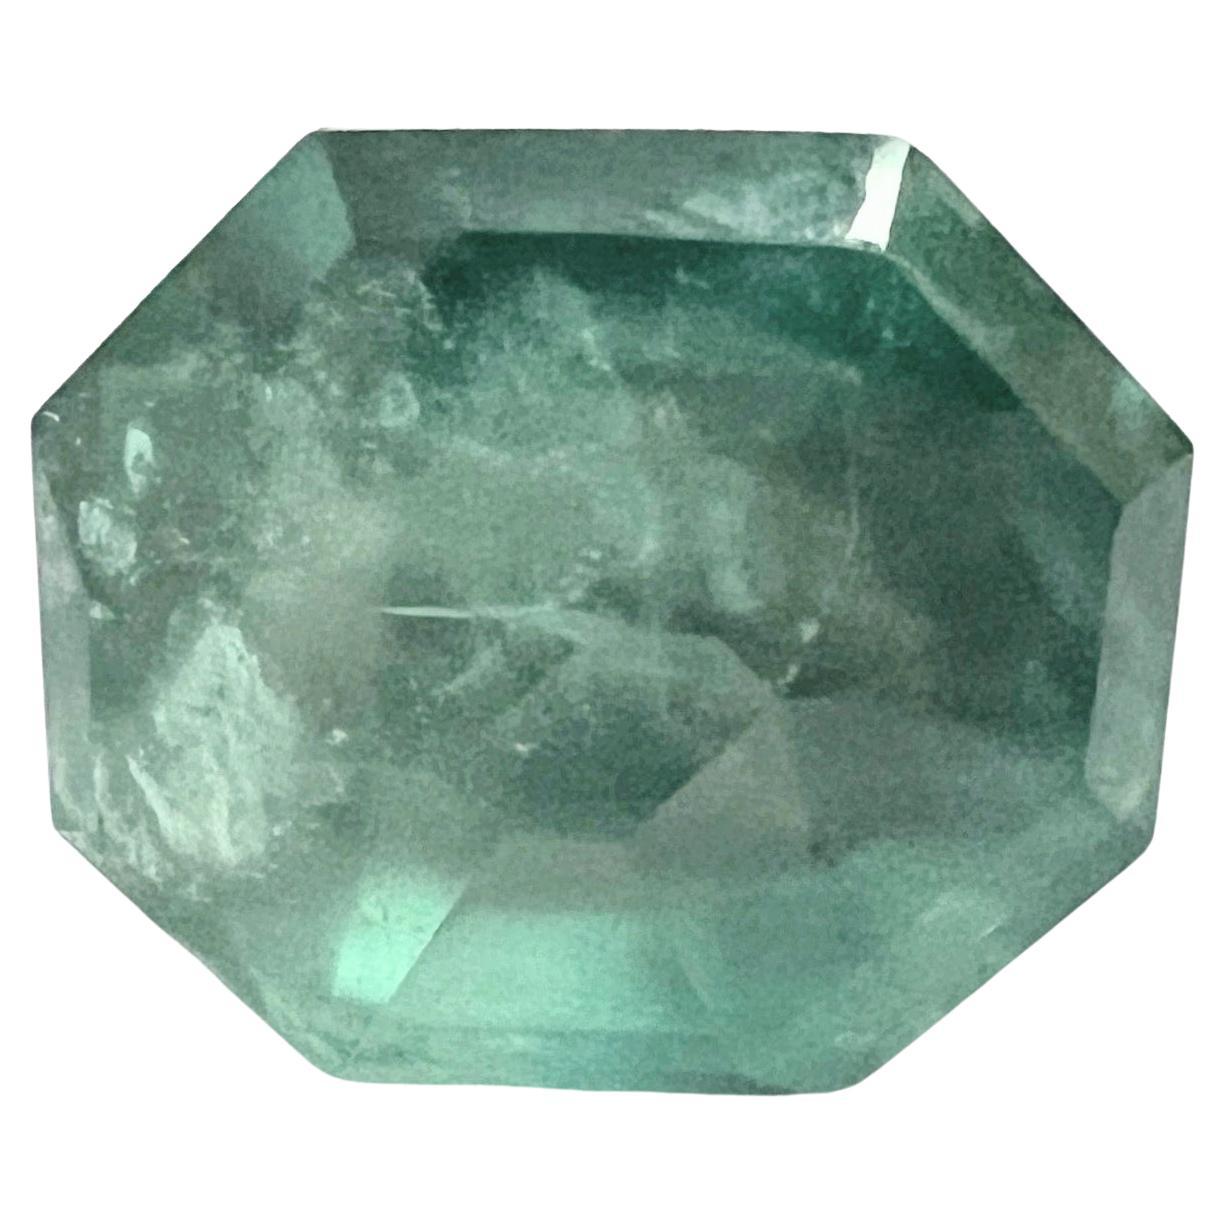 Our exquisite 10.35ct Natural Non-Oil Green Radiant Cut Emerald Gemstone, a dazzling piece that seamlessly marries classic charm with vibrant allure. 

Gemstone Type: Natural Non-Oil Green Radiant Cut Emerald
Carat Weight: 10.35 carats
Dimensions: